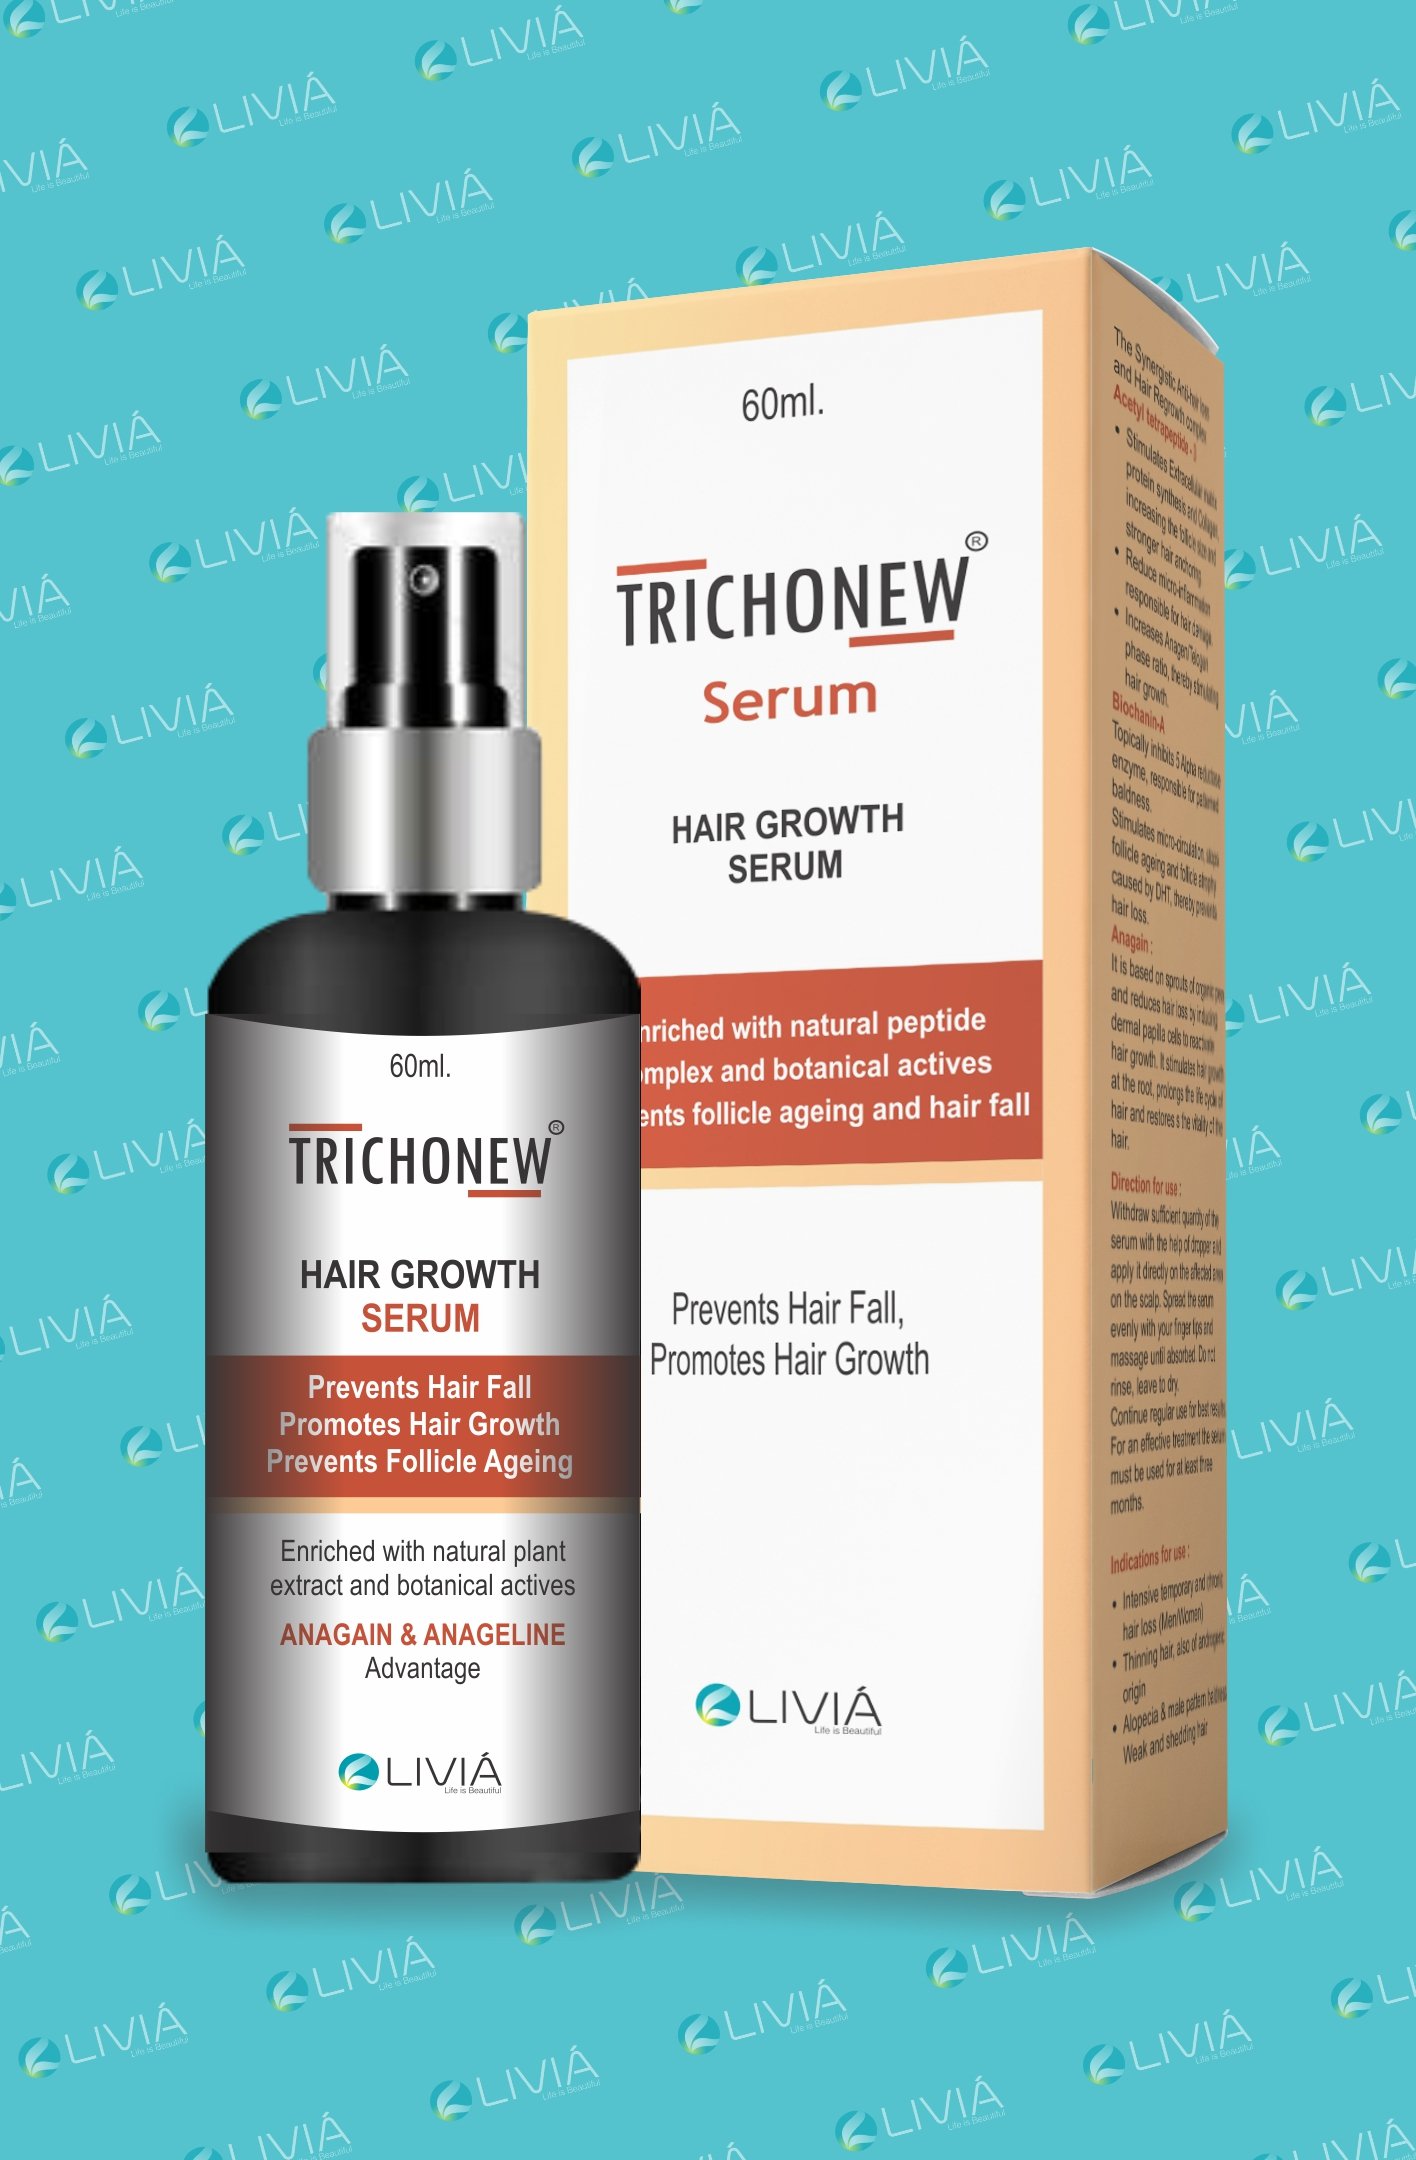 Trichonew - Best Hair Growth Serum in India | Livia Healthcare